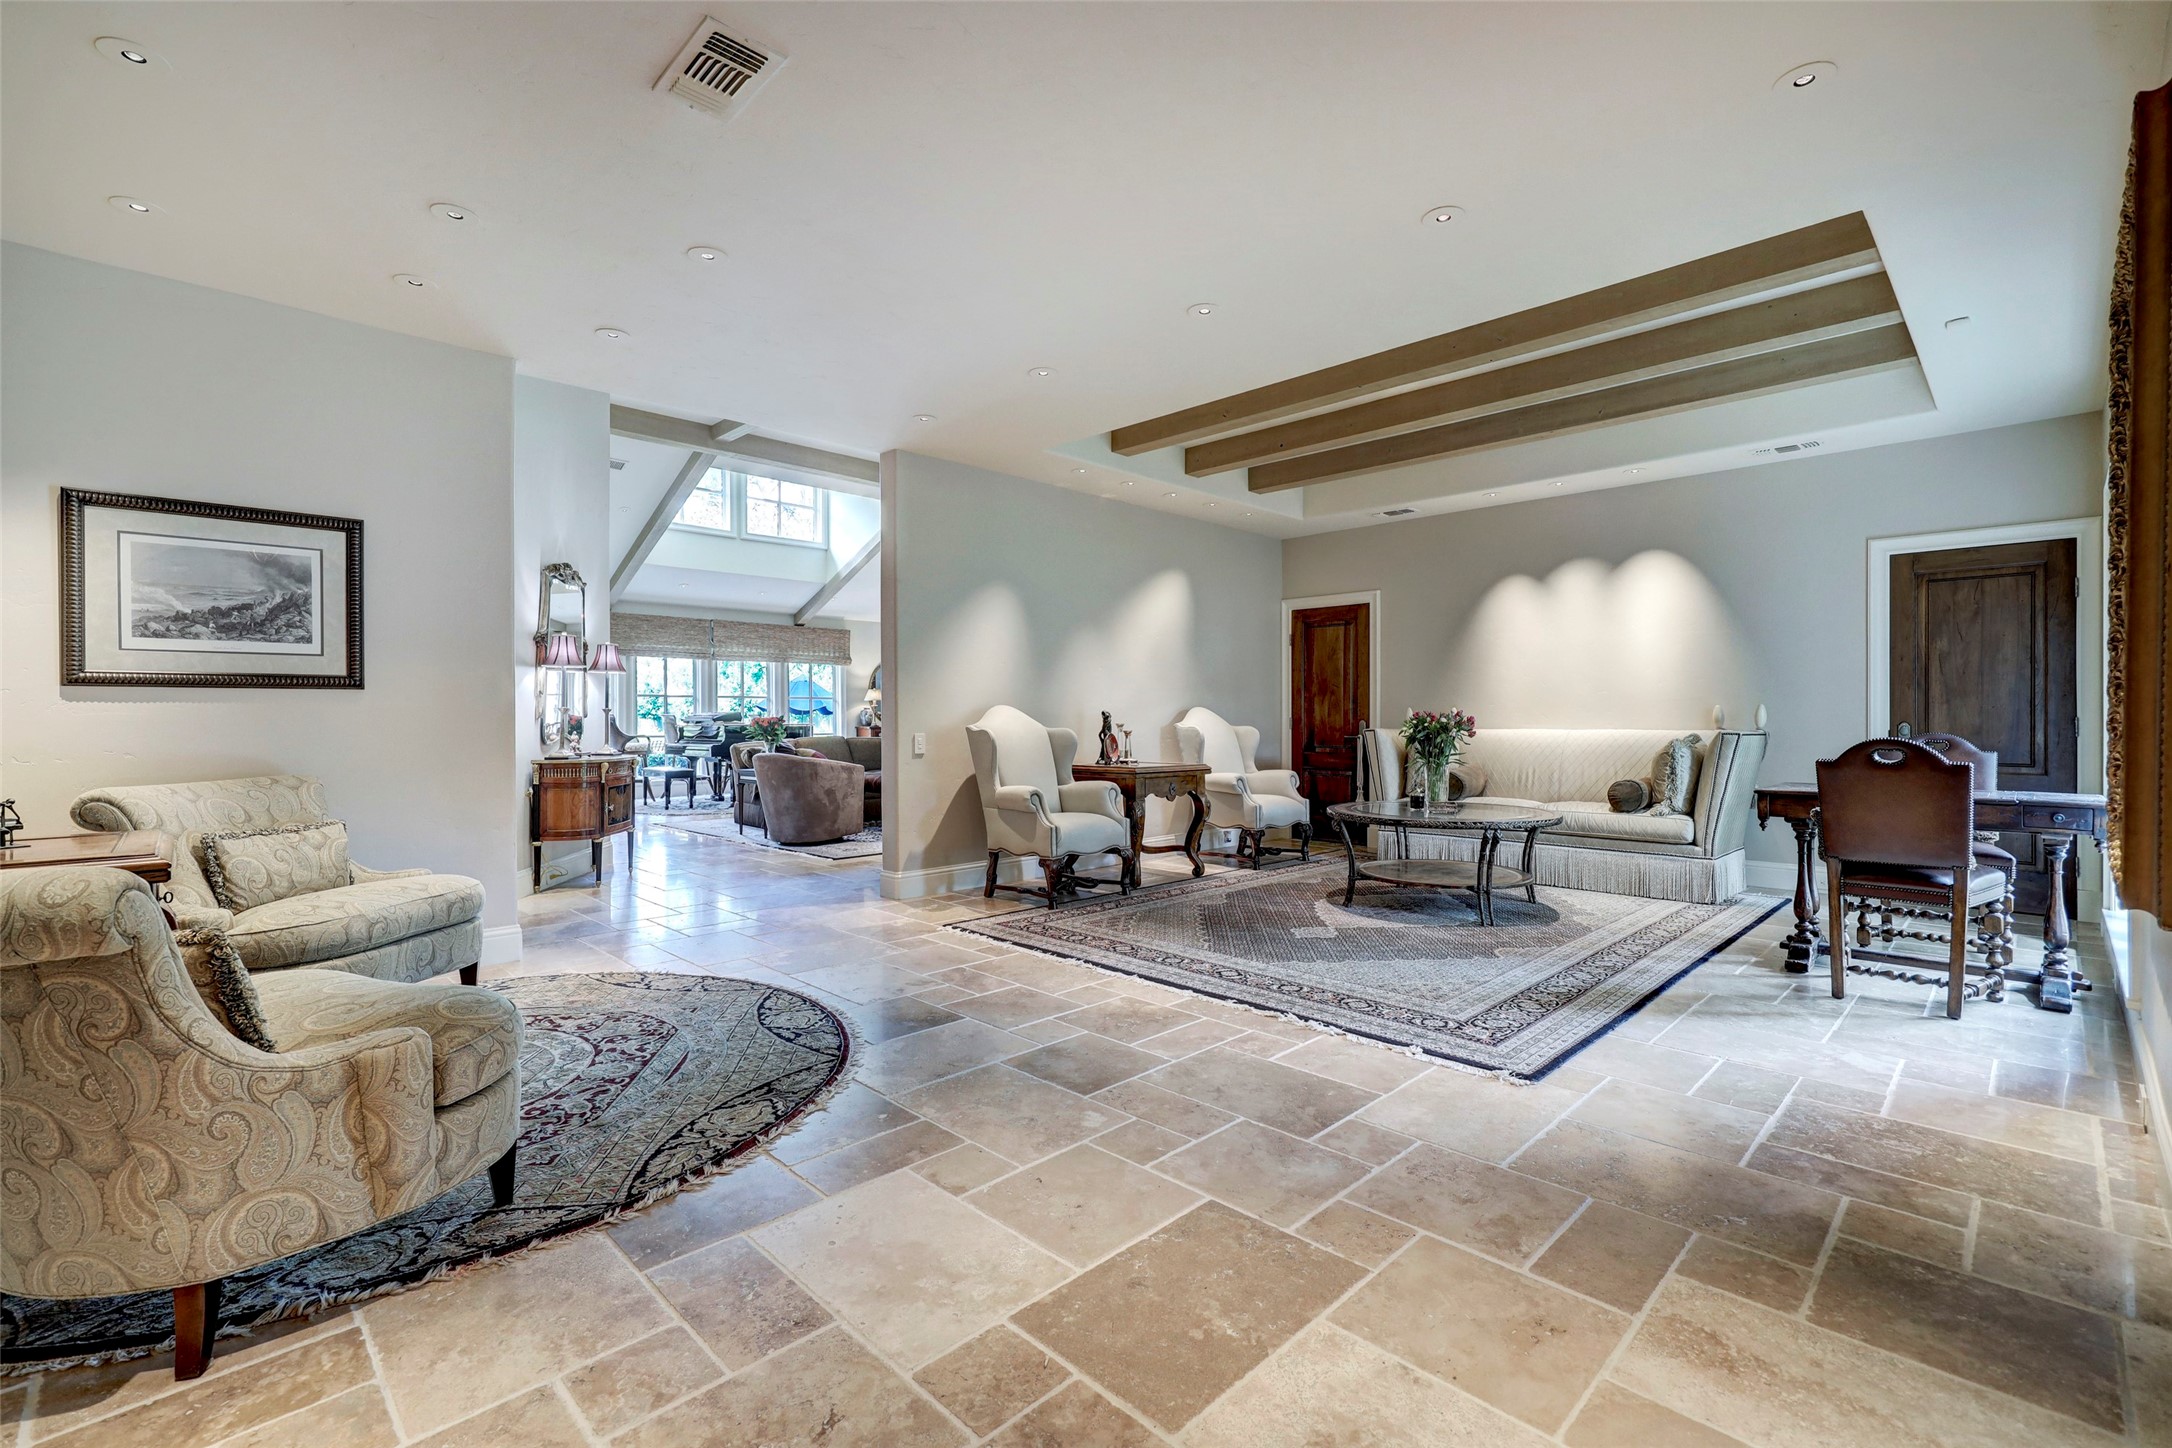 The formal living room features beamed ceiling, stone floor and art lighting.